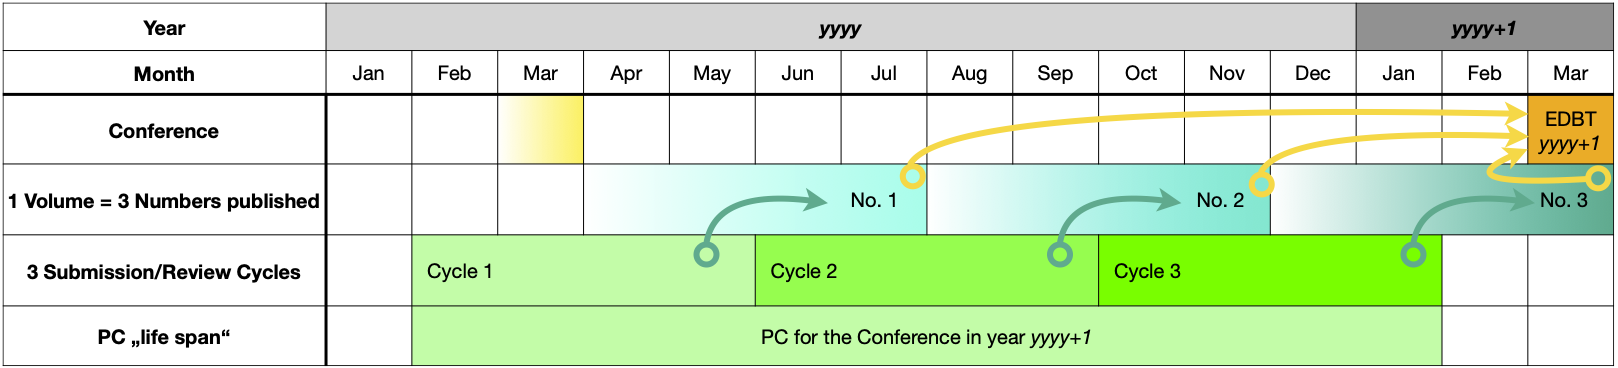 Publication Schedule for 3 review cycles per volume/year